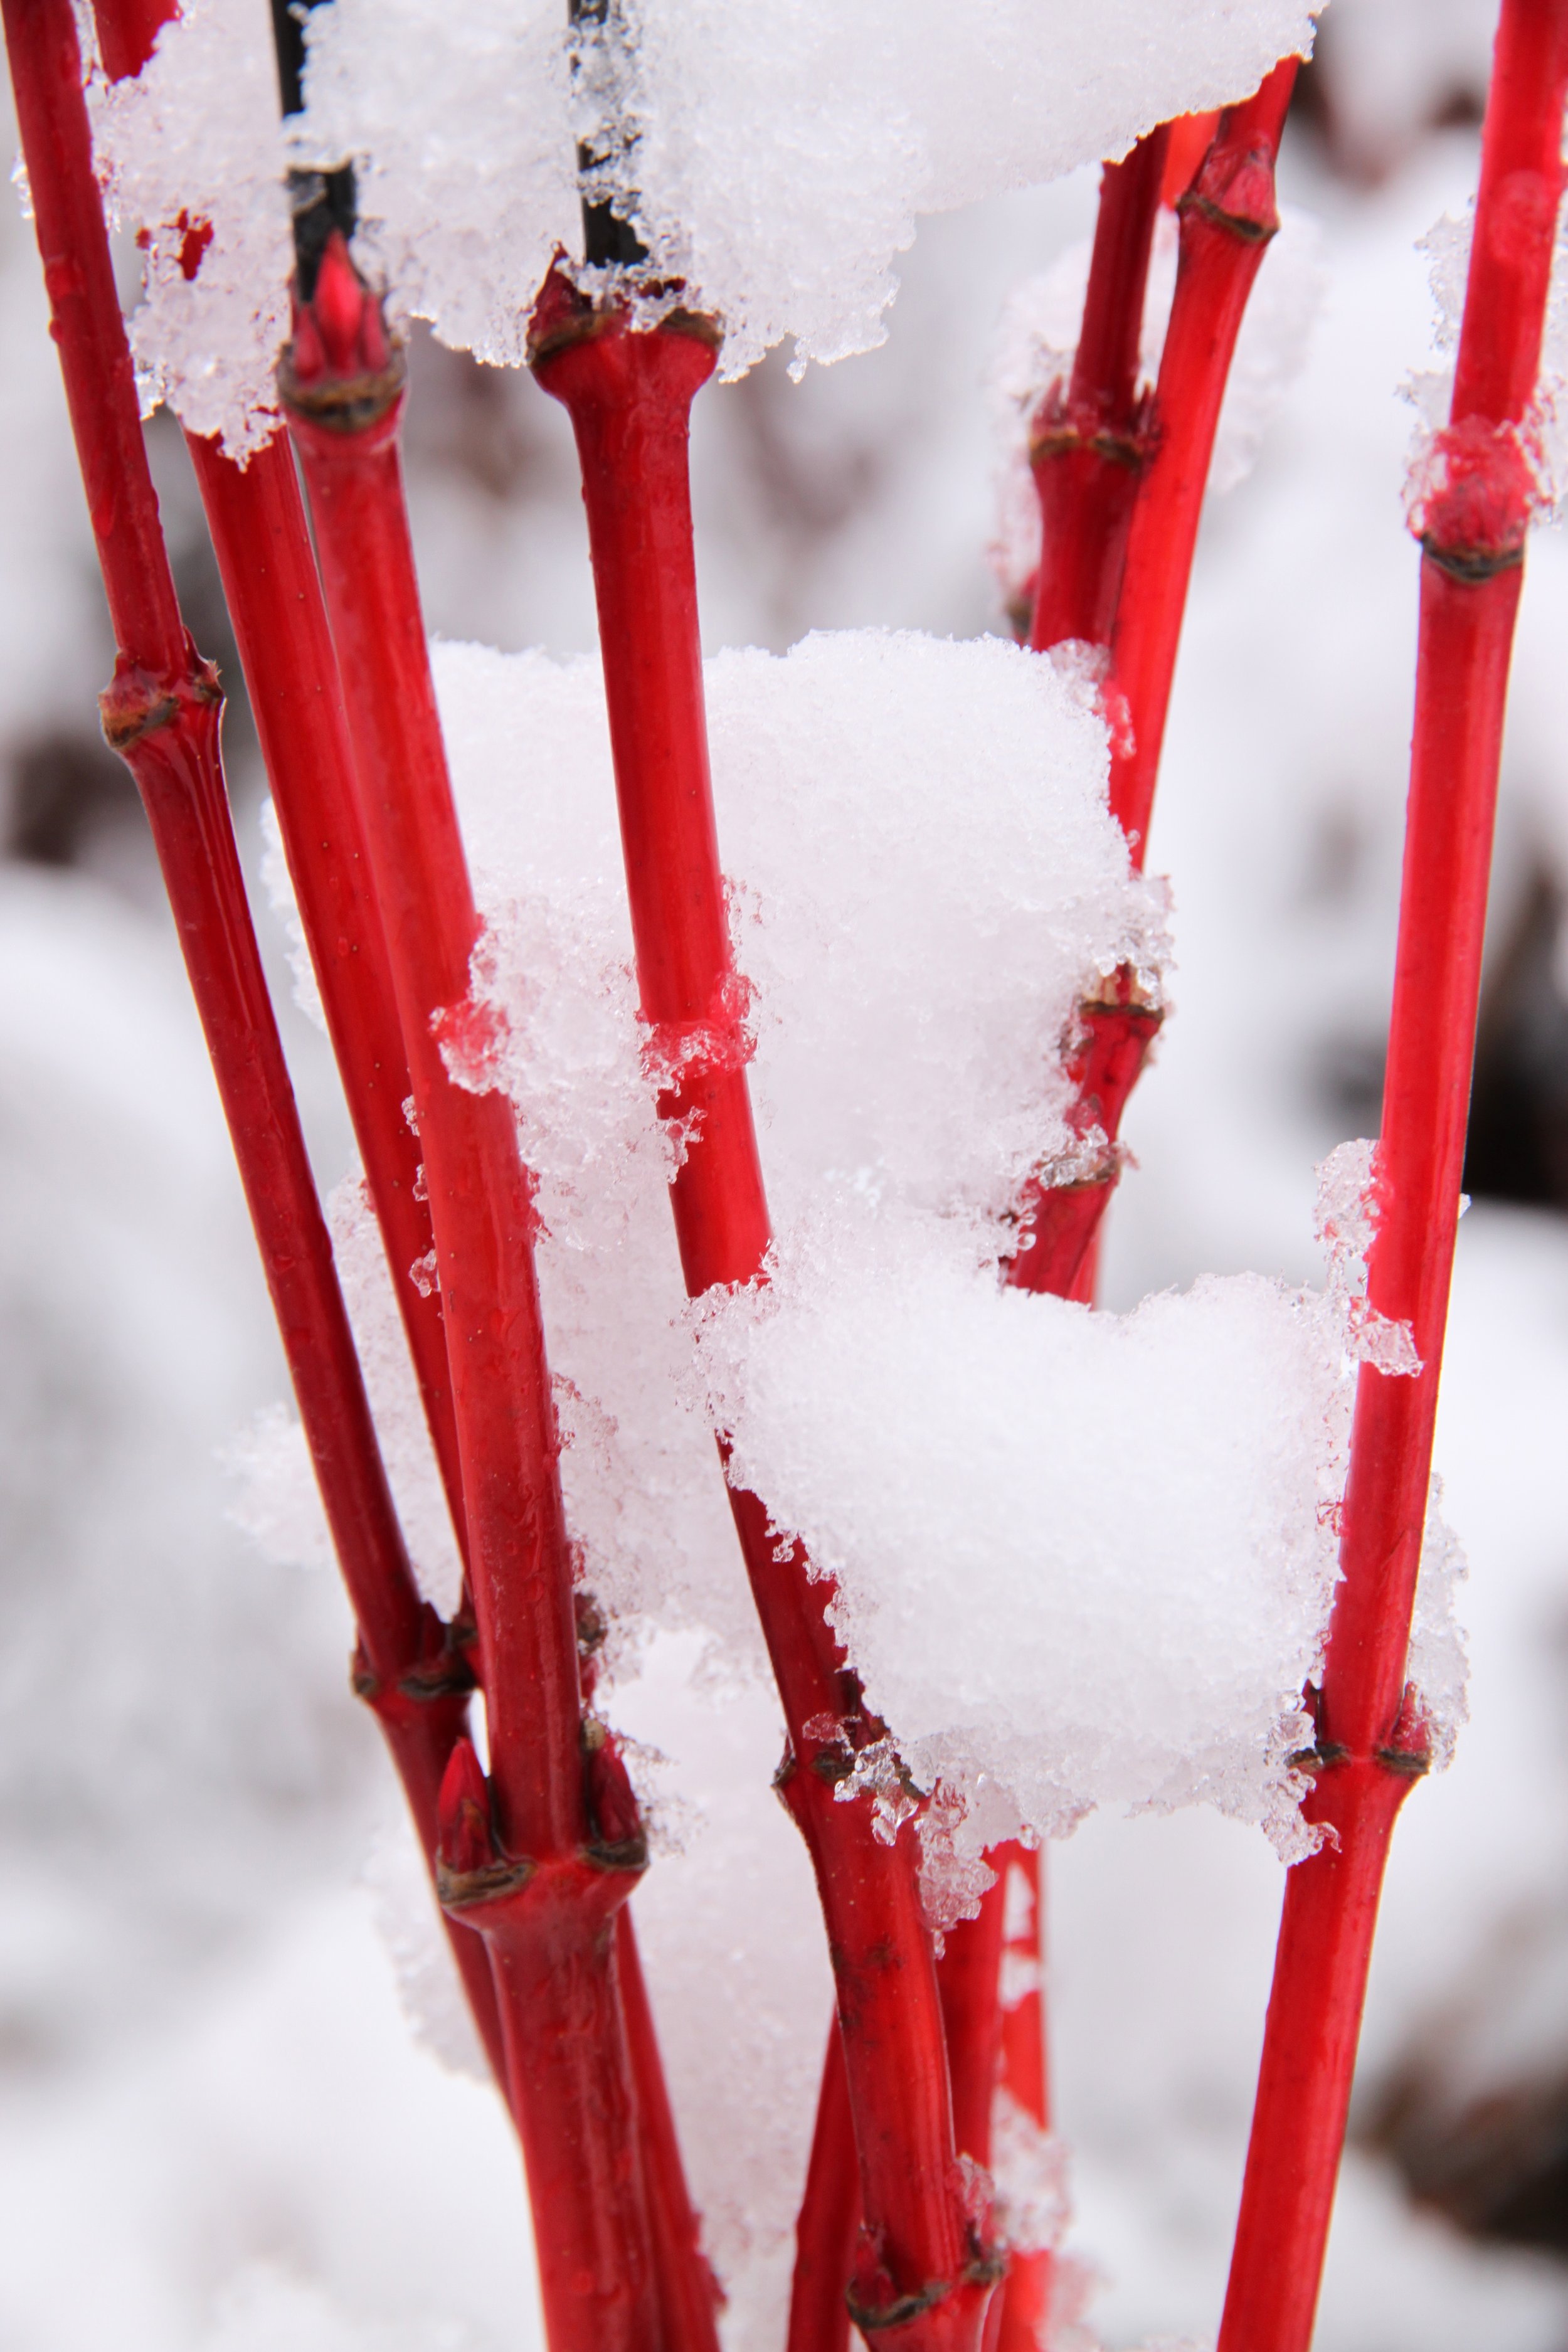 Copy of Pacific Fire Maple stems and snow 04.jpg